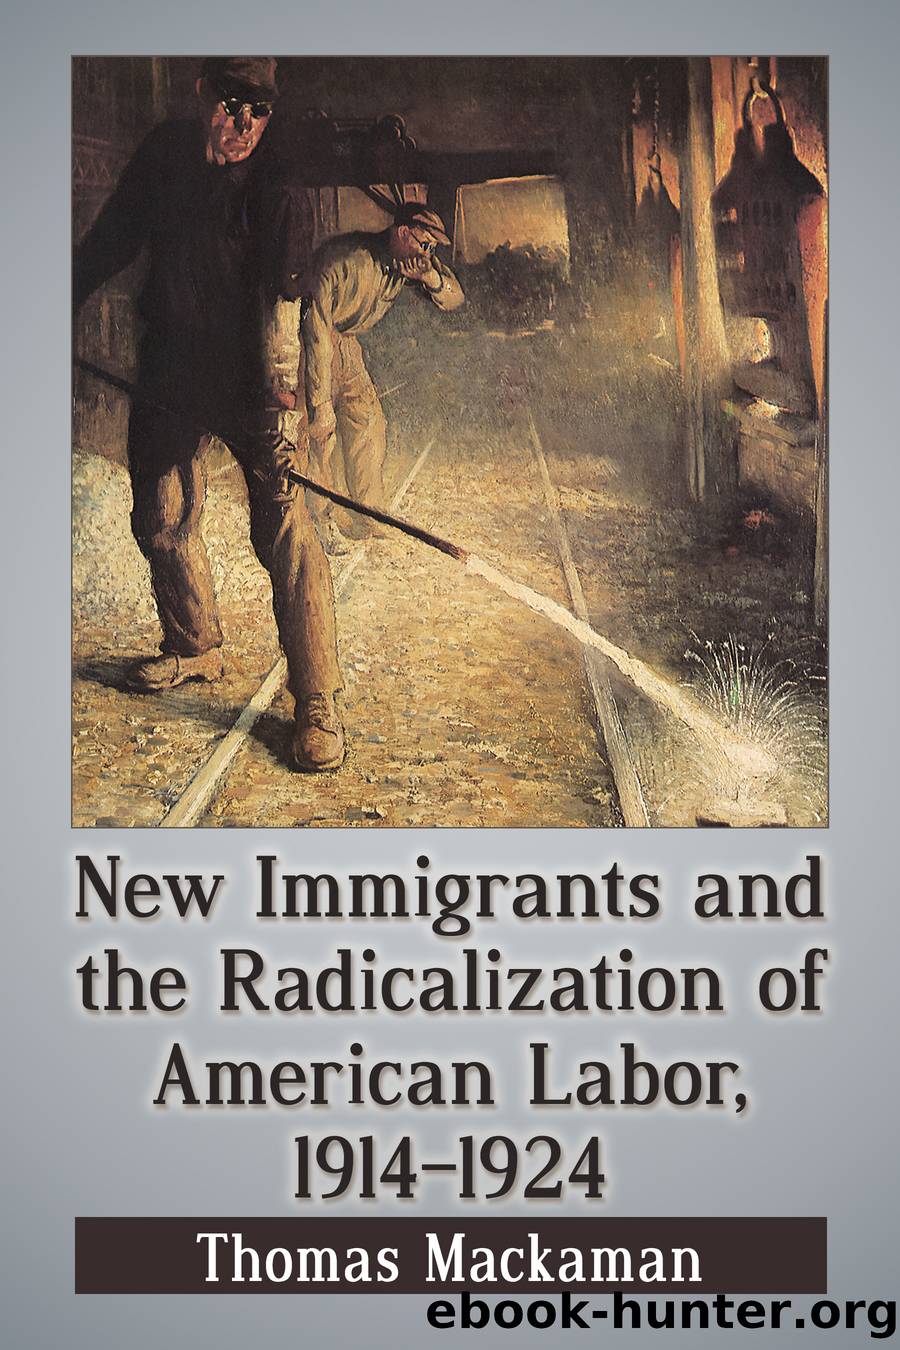 New Immigrants and the Radicalization of American Labor, 1914-1924 by Mackaman Thomas